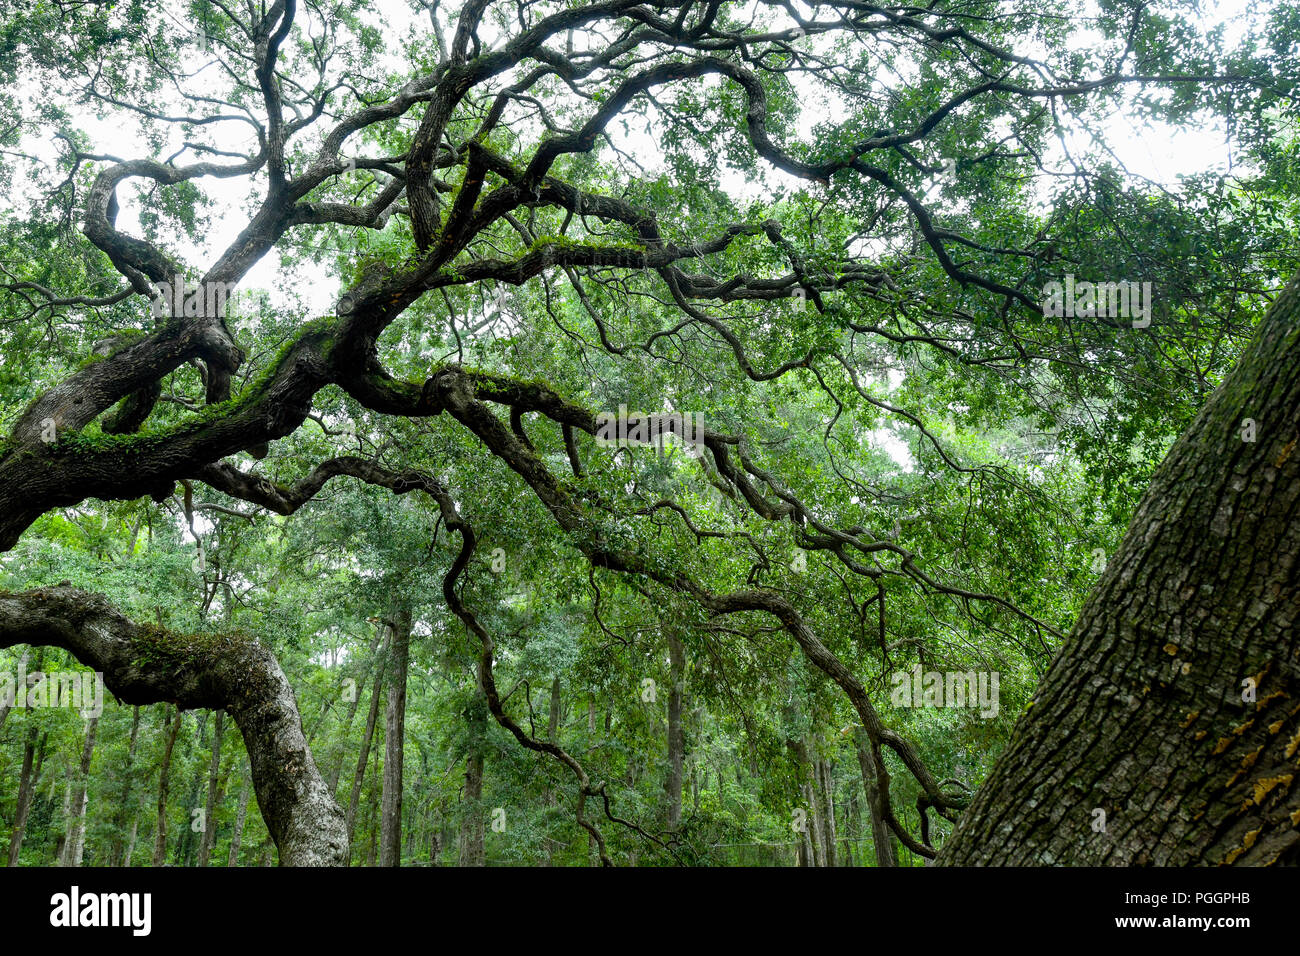 Angel Oak - one of the oldest trees in the United states - a Southern live oak tree on Johns Island in South Carolina Stock Photo